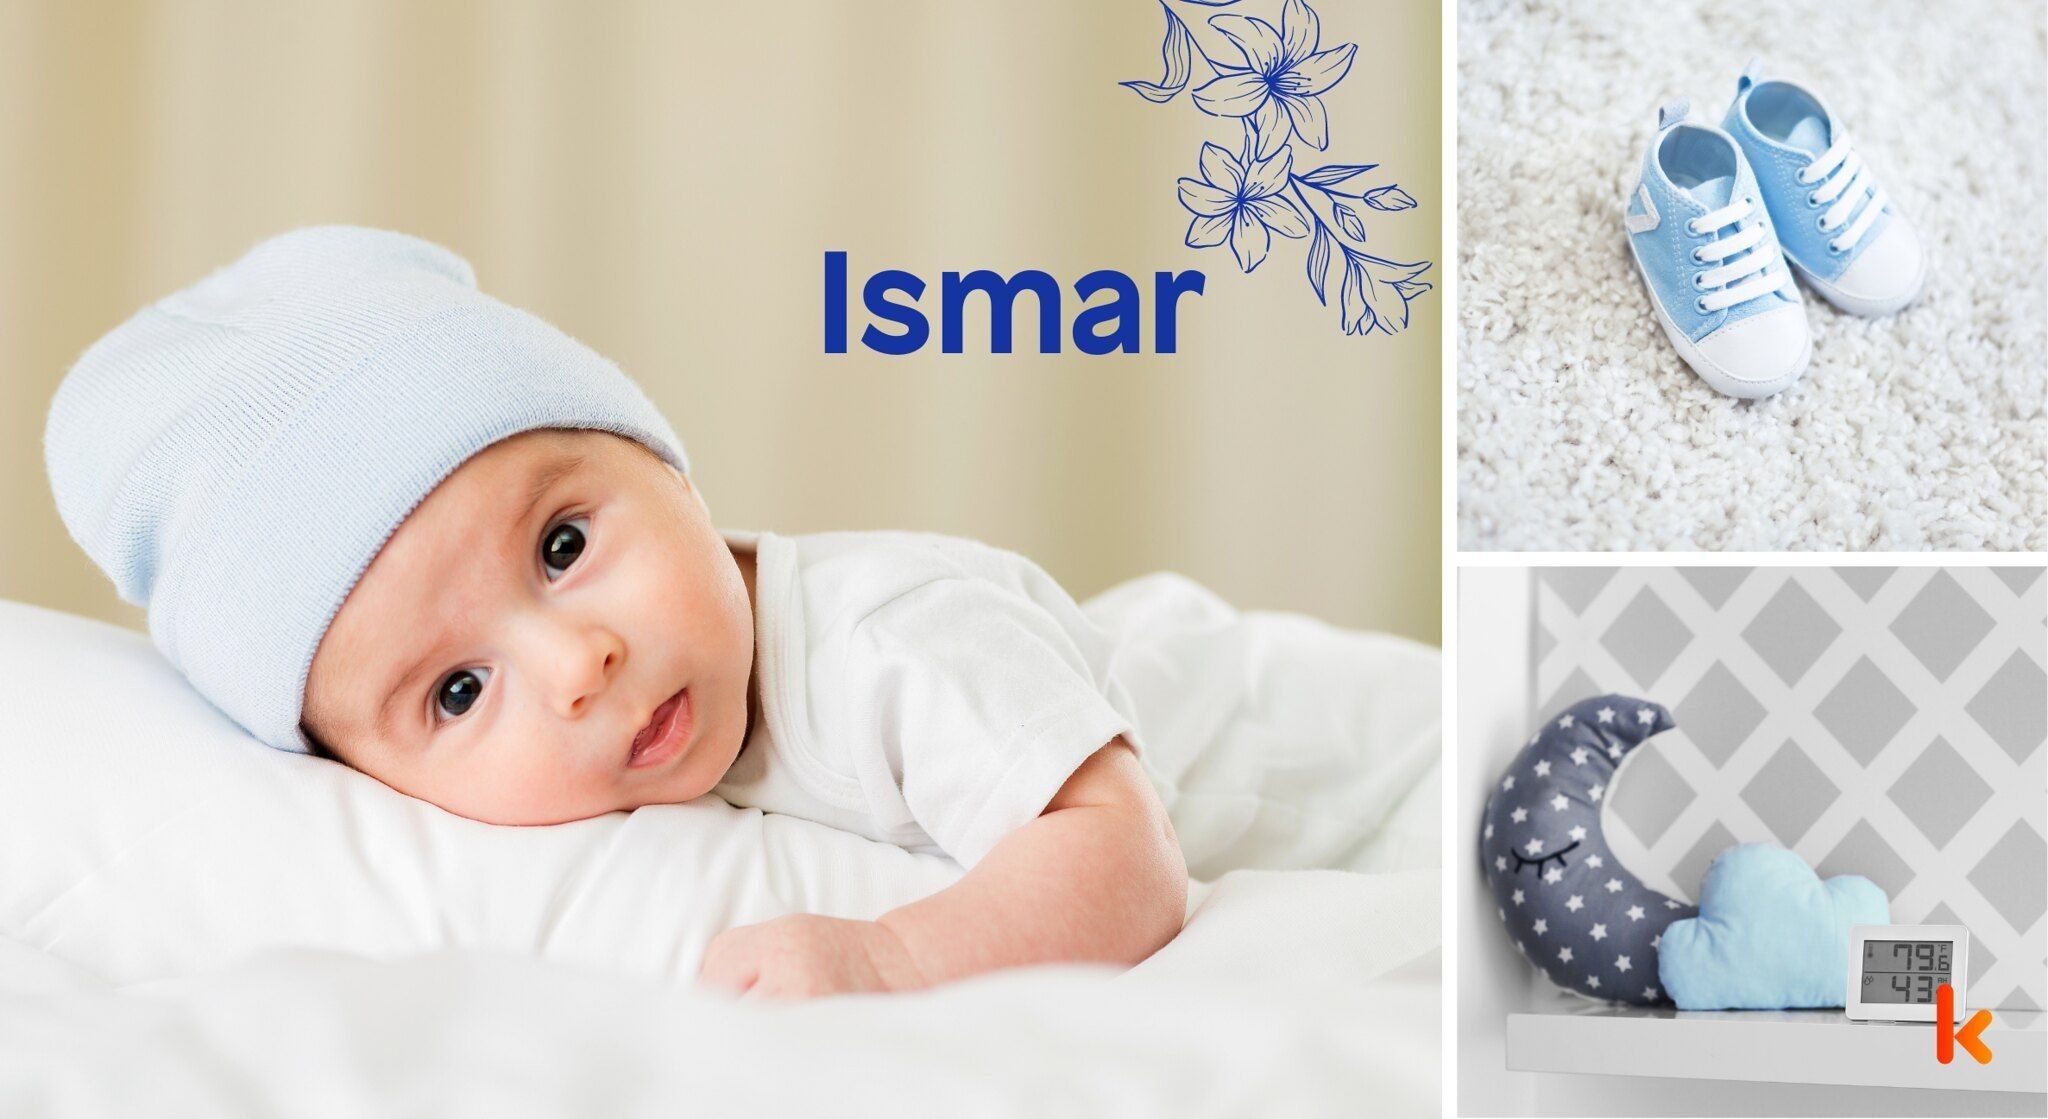 Meaning of the name Ismar